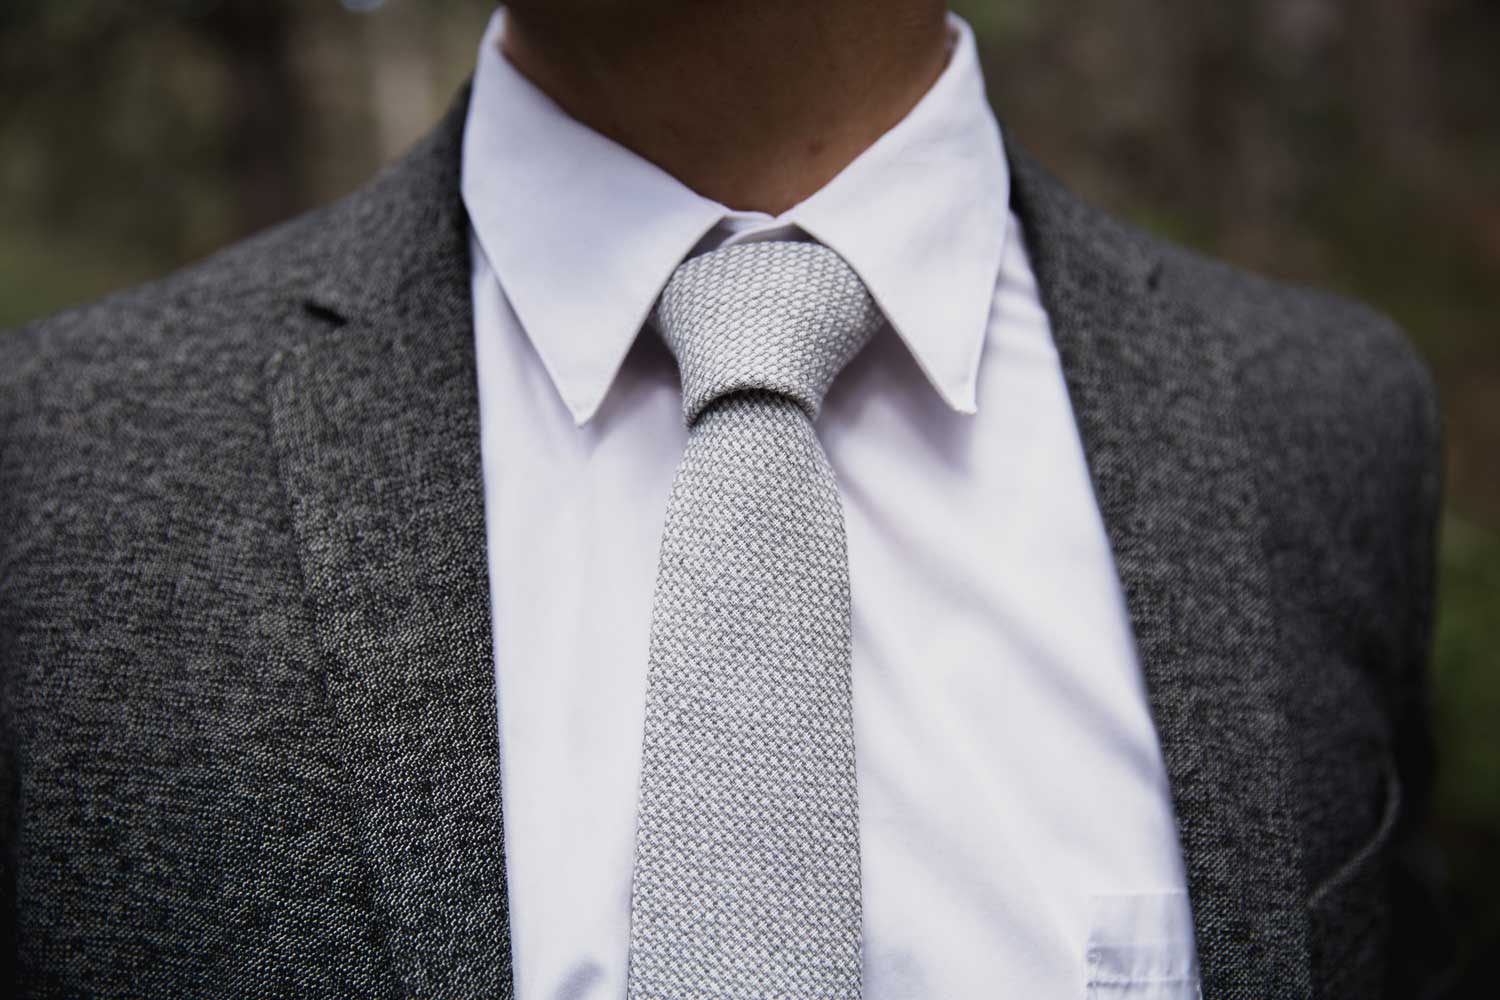 Calm tie worn with white shirt and textured charcoal gray suit jacket.